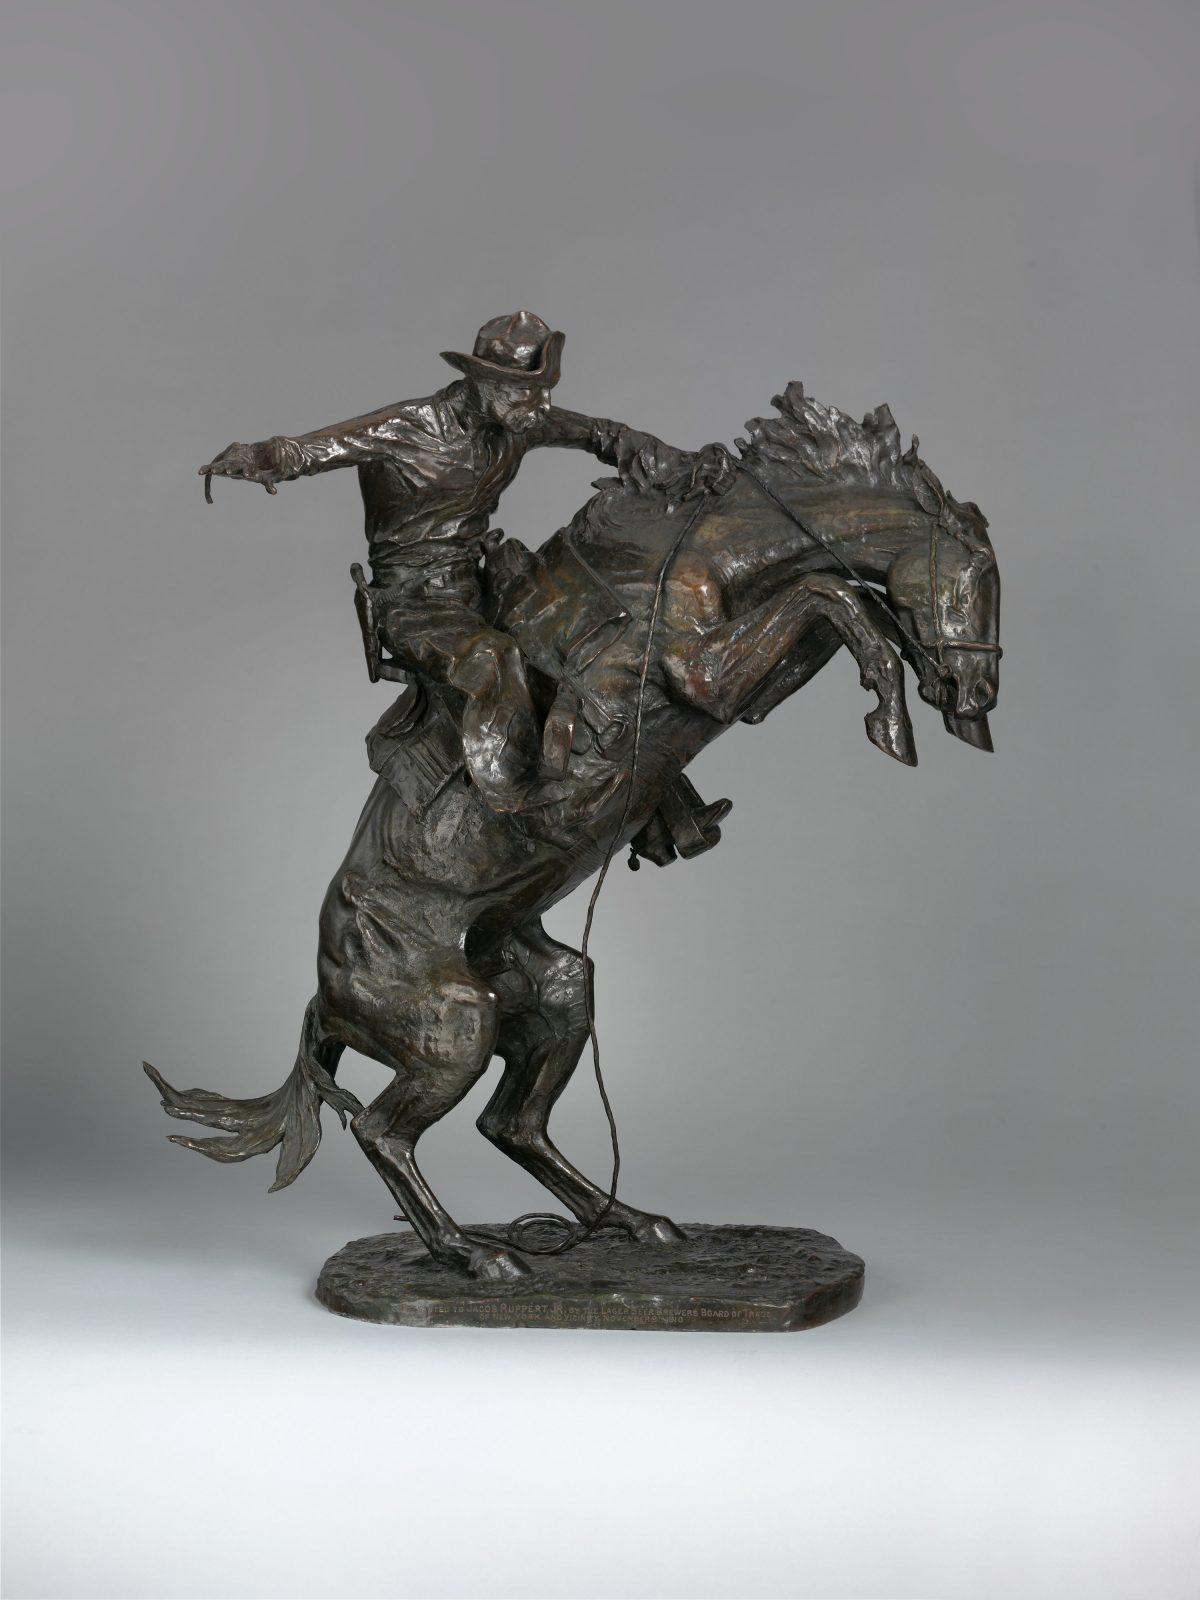 "The Broncho Buster," 1895, revised 1909, by Frederic Remington. Bronze, cast by November 1910, 32 1/4 inches x 27 1/4 x 15 inches. Bequest of Jacob Ruppert, 1939. (The Metropolitan Museum)